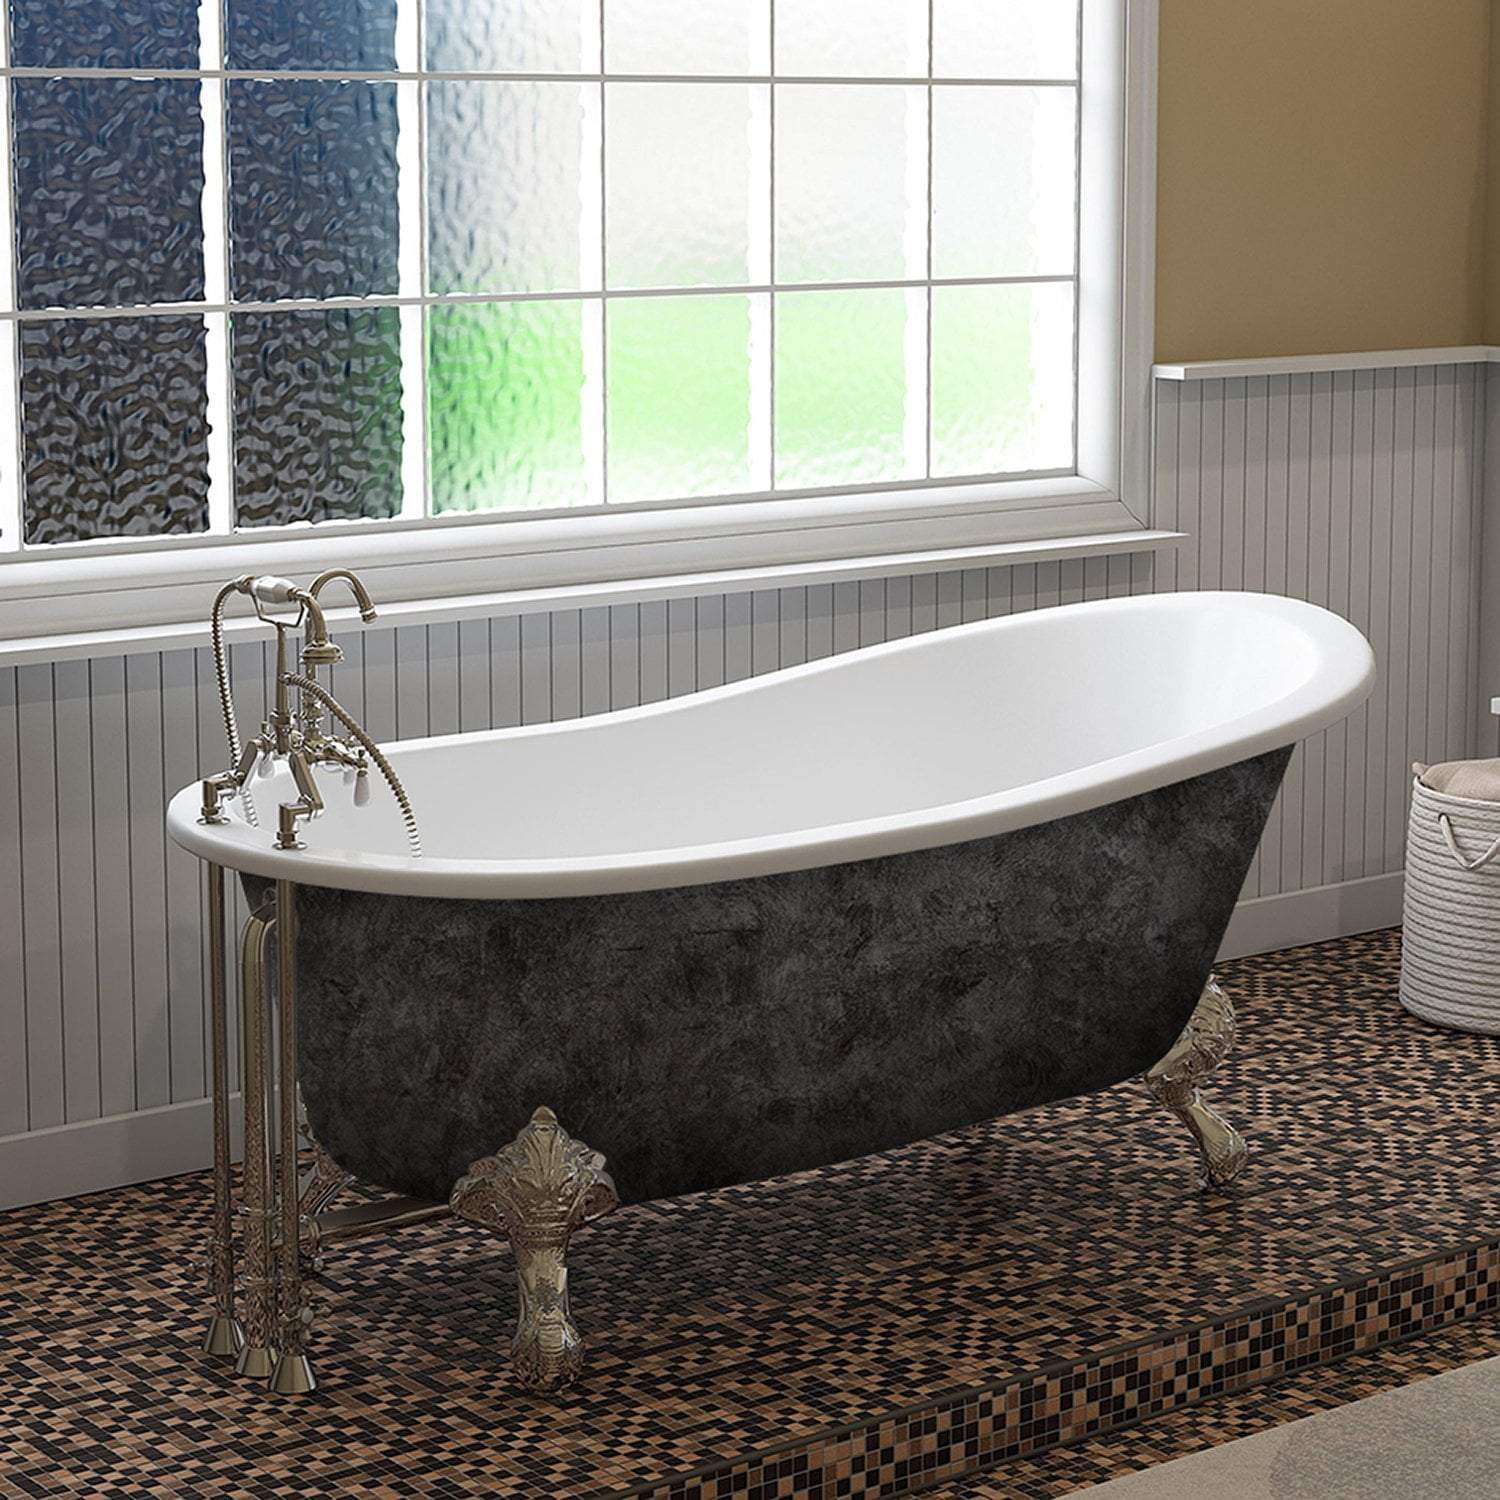 Scorched Platinum 67” x 30” Cast Iron Slipper Bathtub with” 7” Deck Mount Faucet Holes and Polished Chrome Ball and Claw Feet